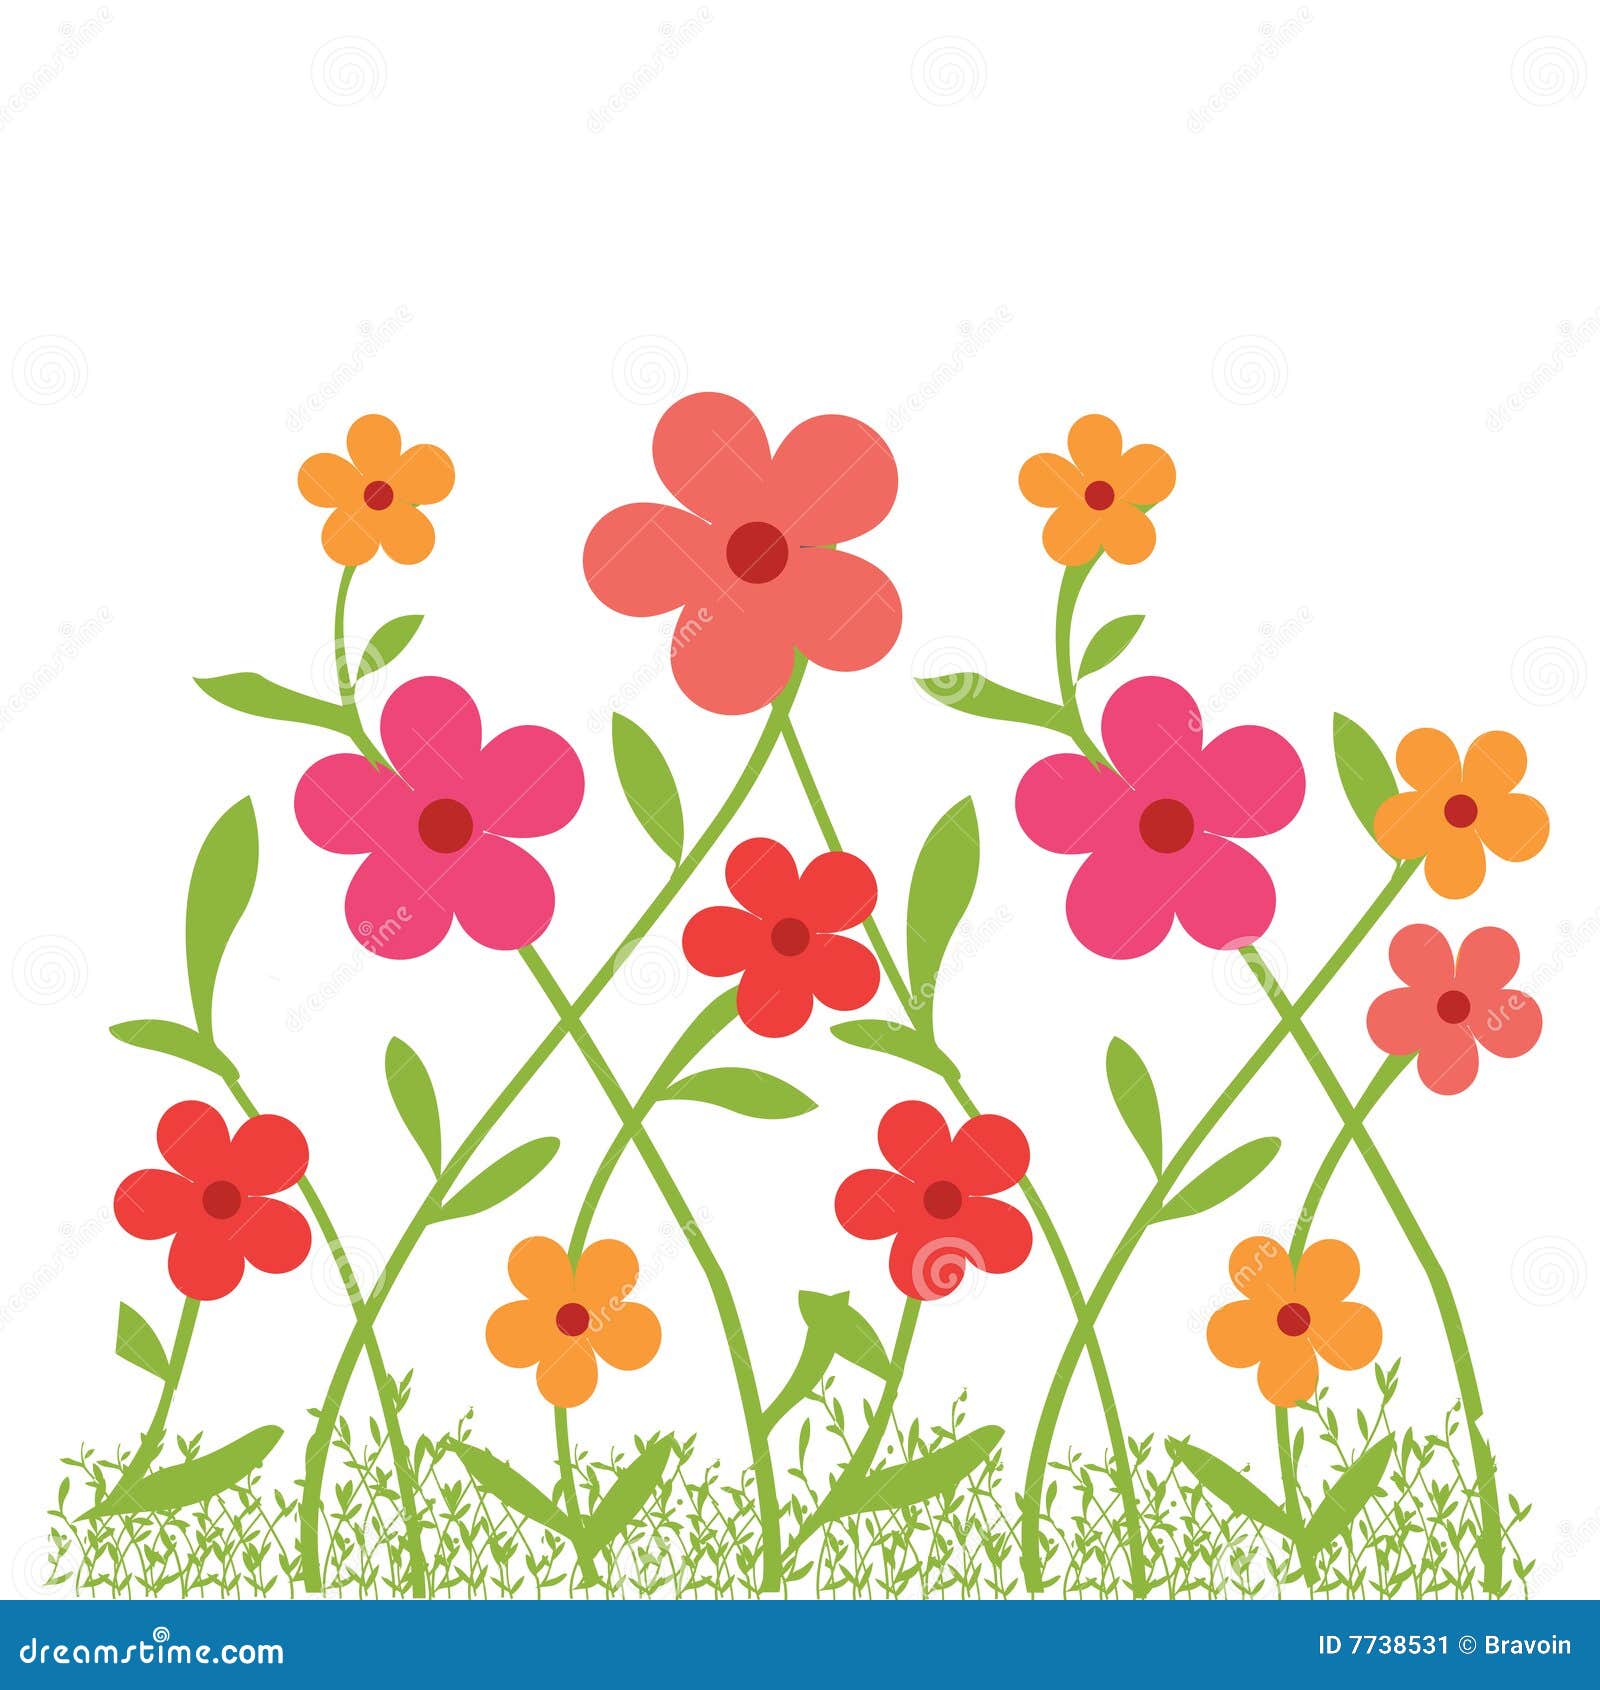 Colorful flowers in garden - illustrated vector art work.